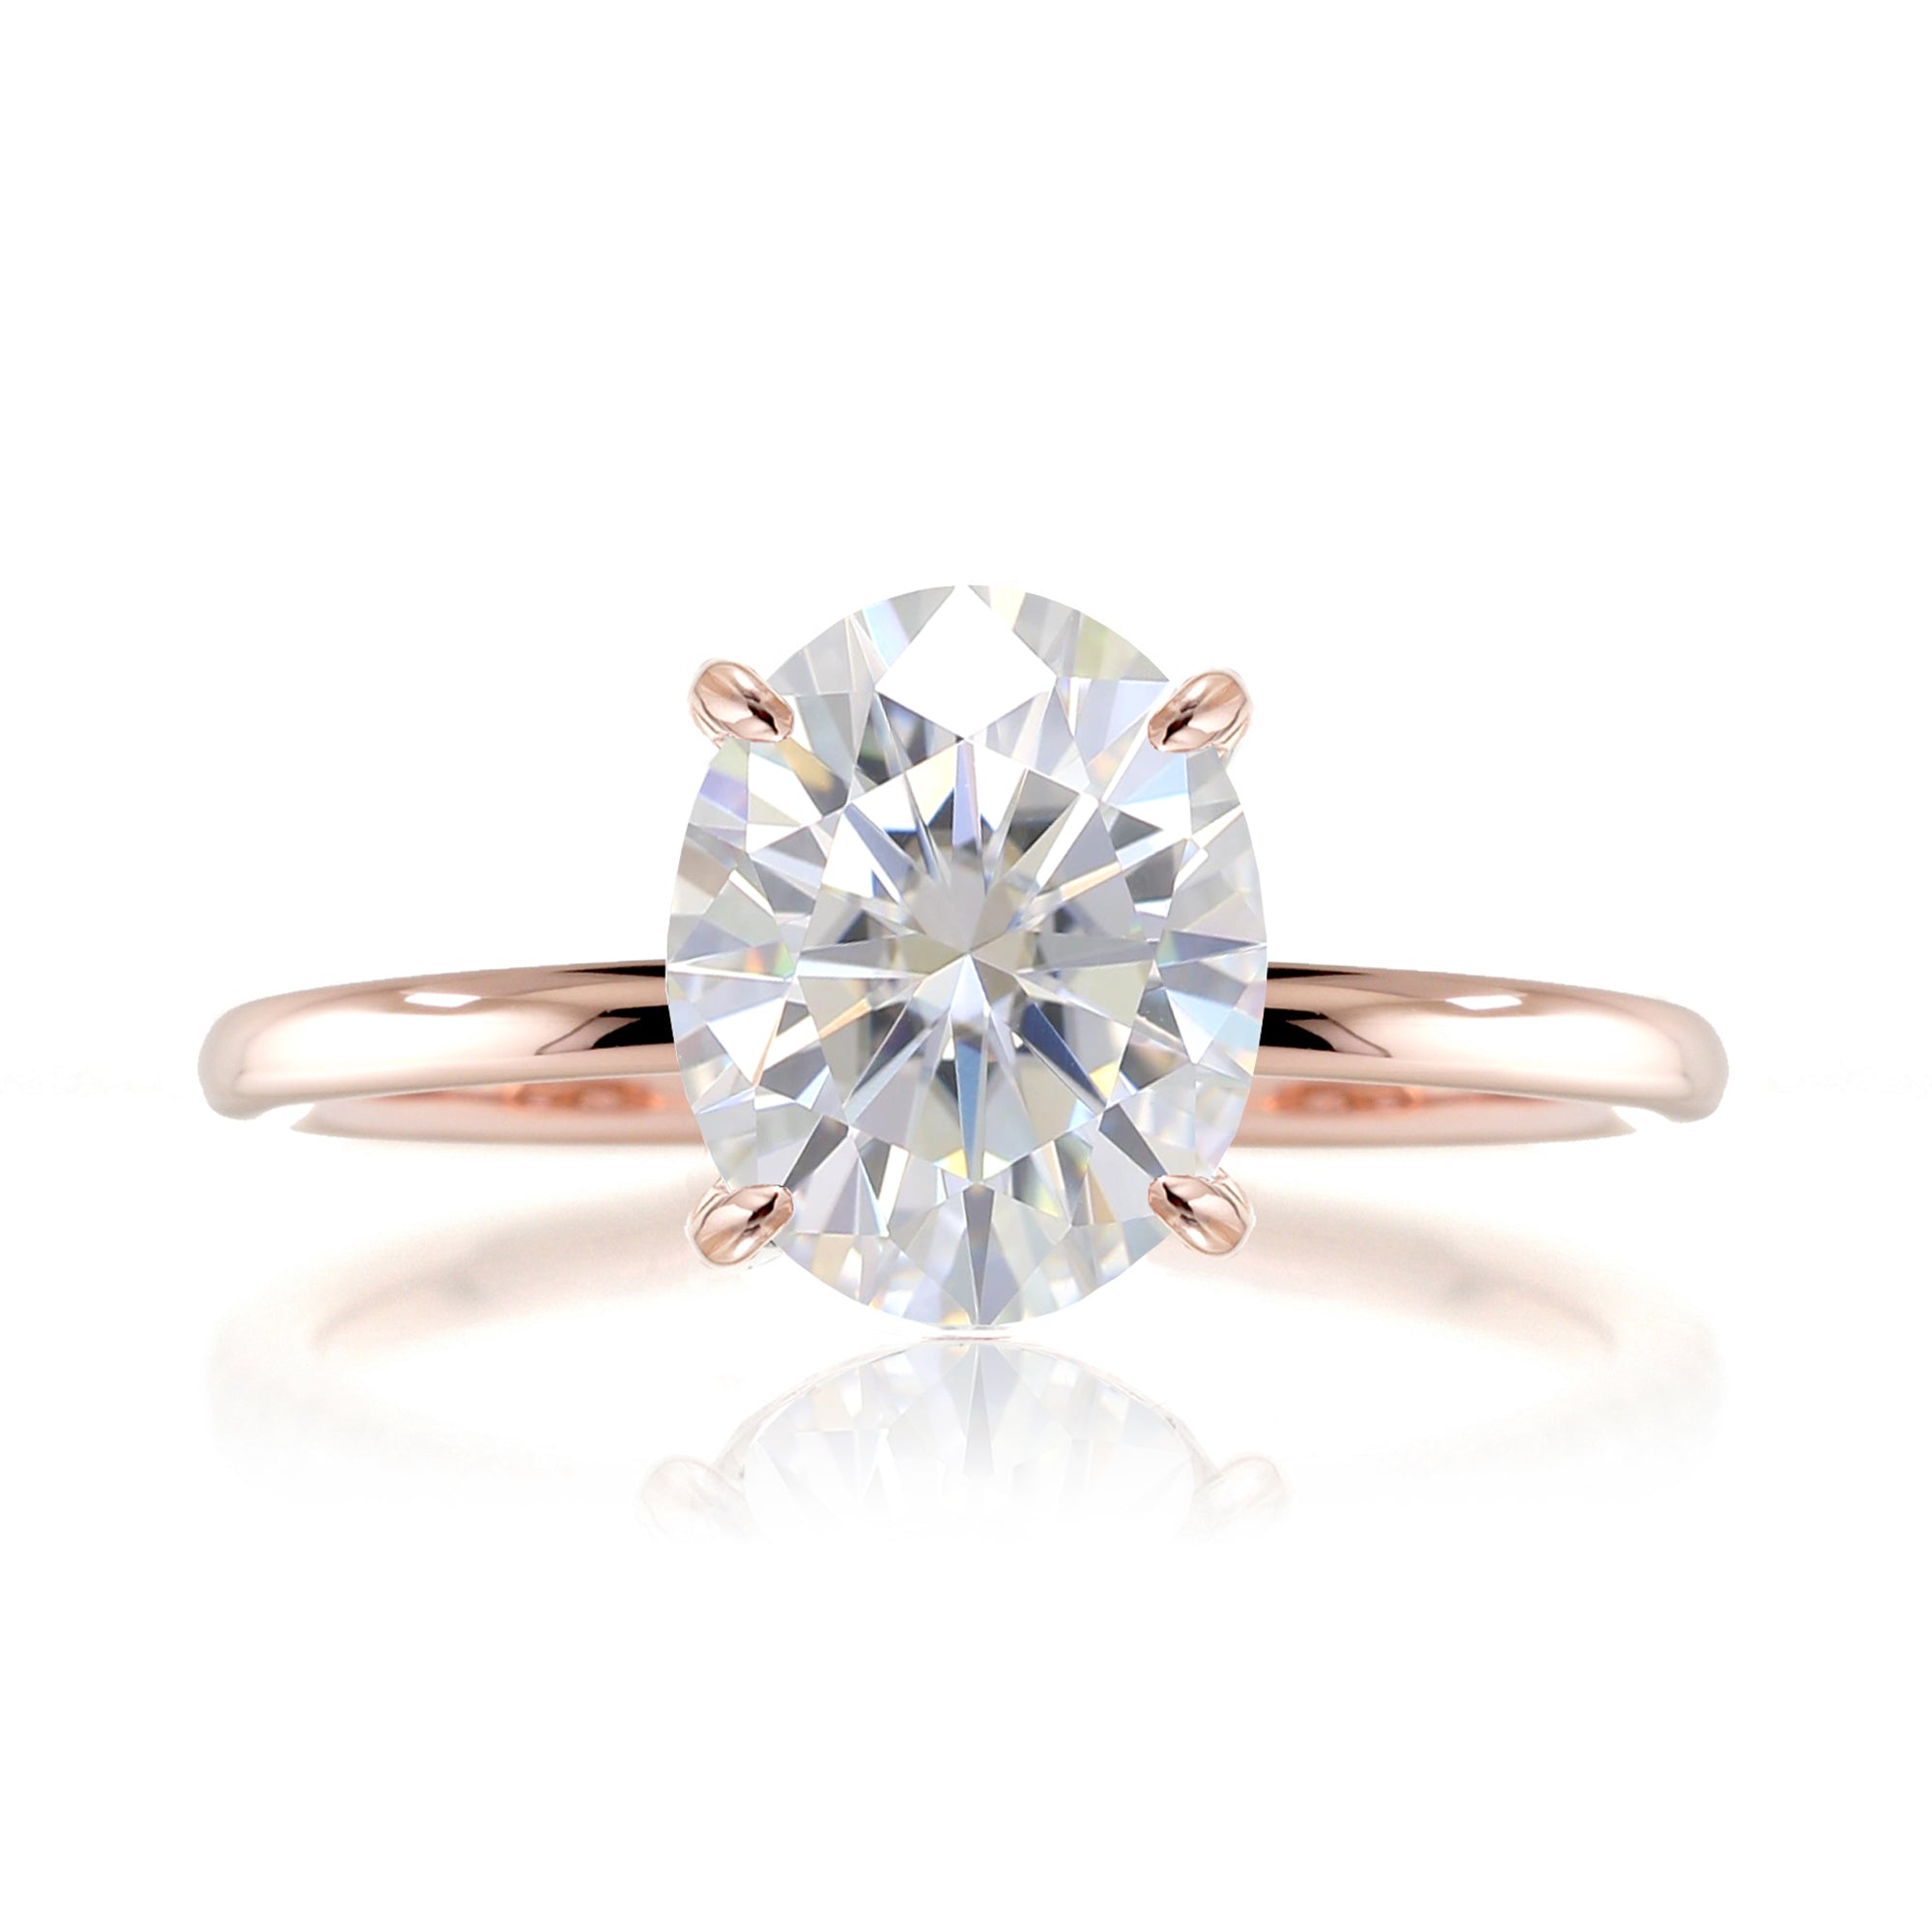 Oval cut moissanite solid band engagement ring rose gold - The Ava